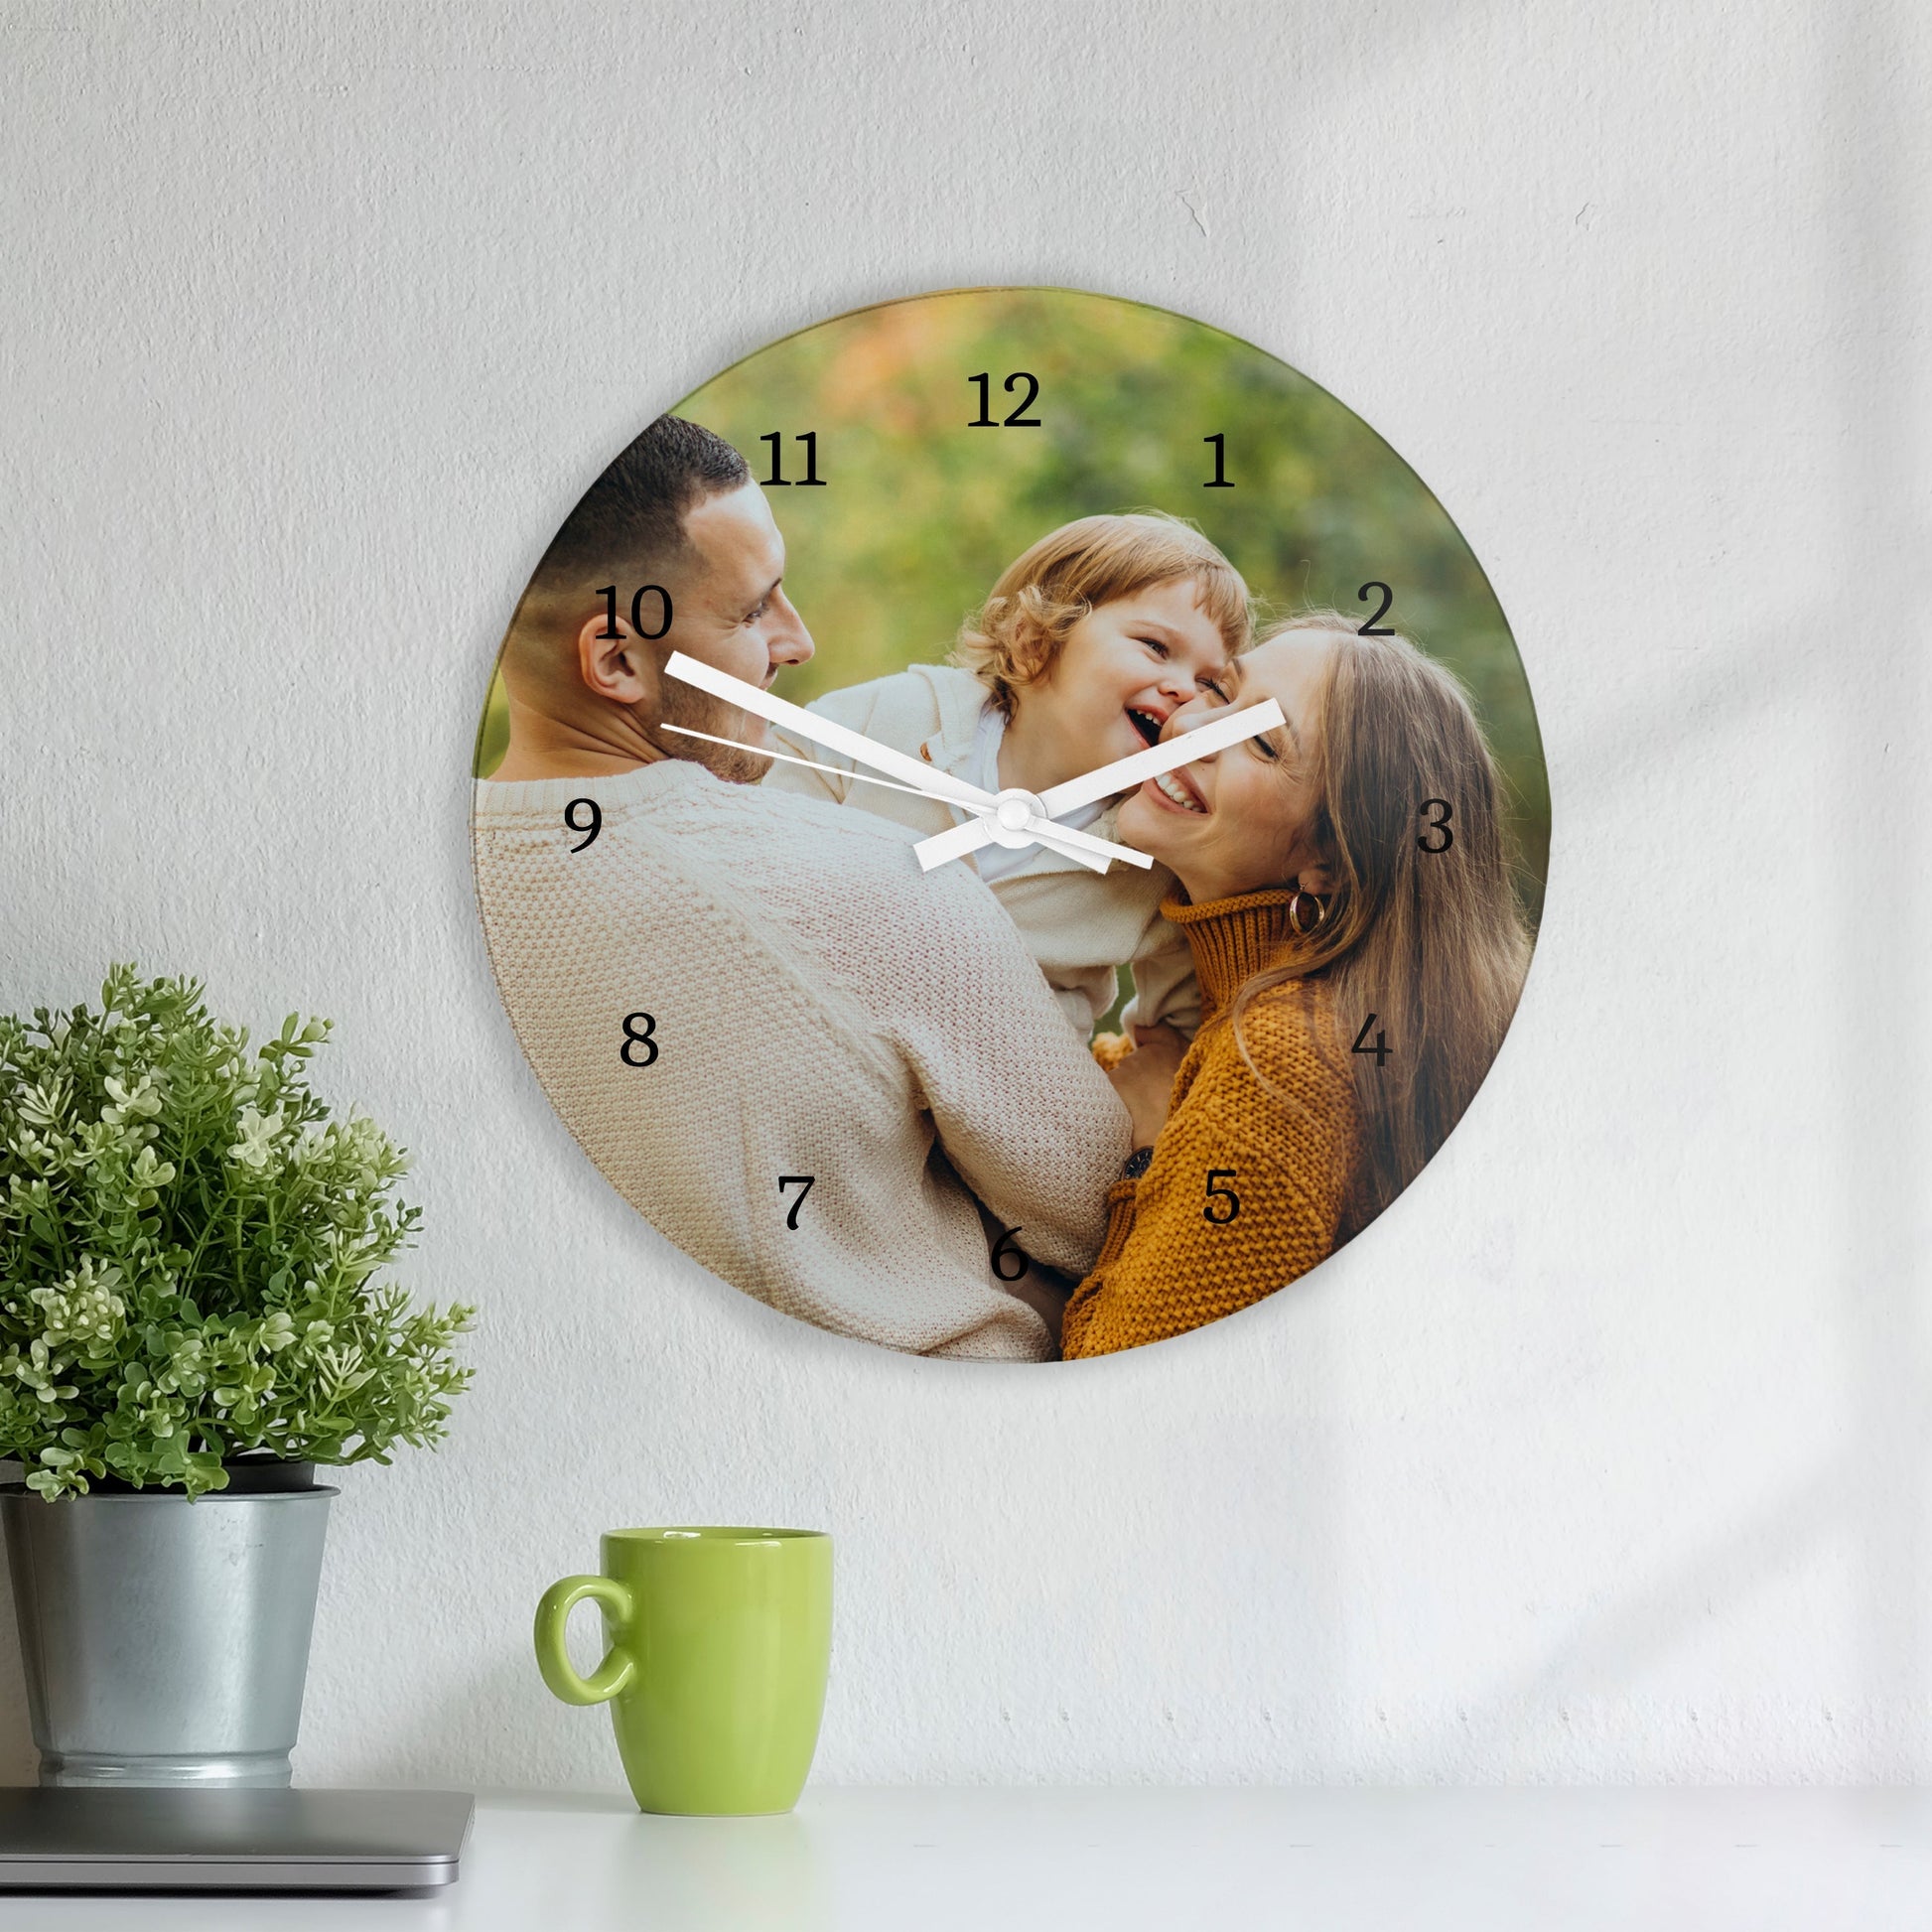 Personalized Clocks - Personalized Picture Wall Clock 